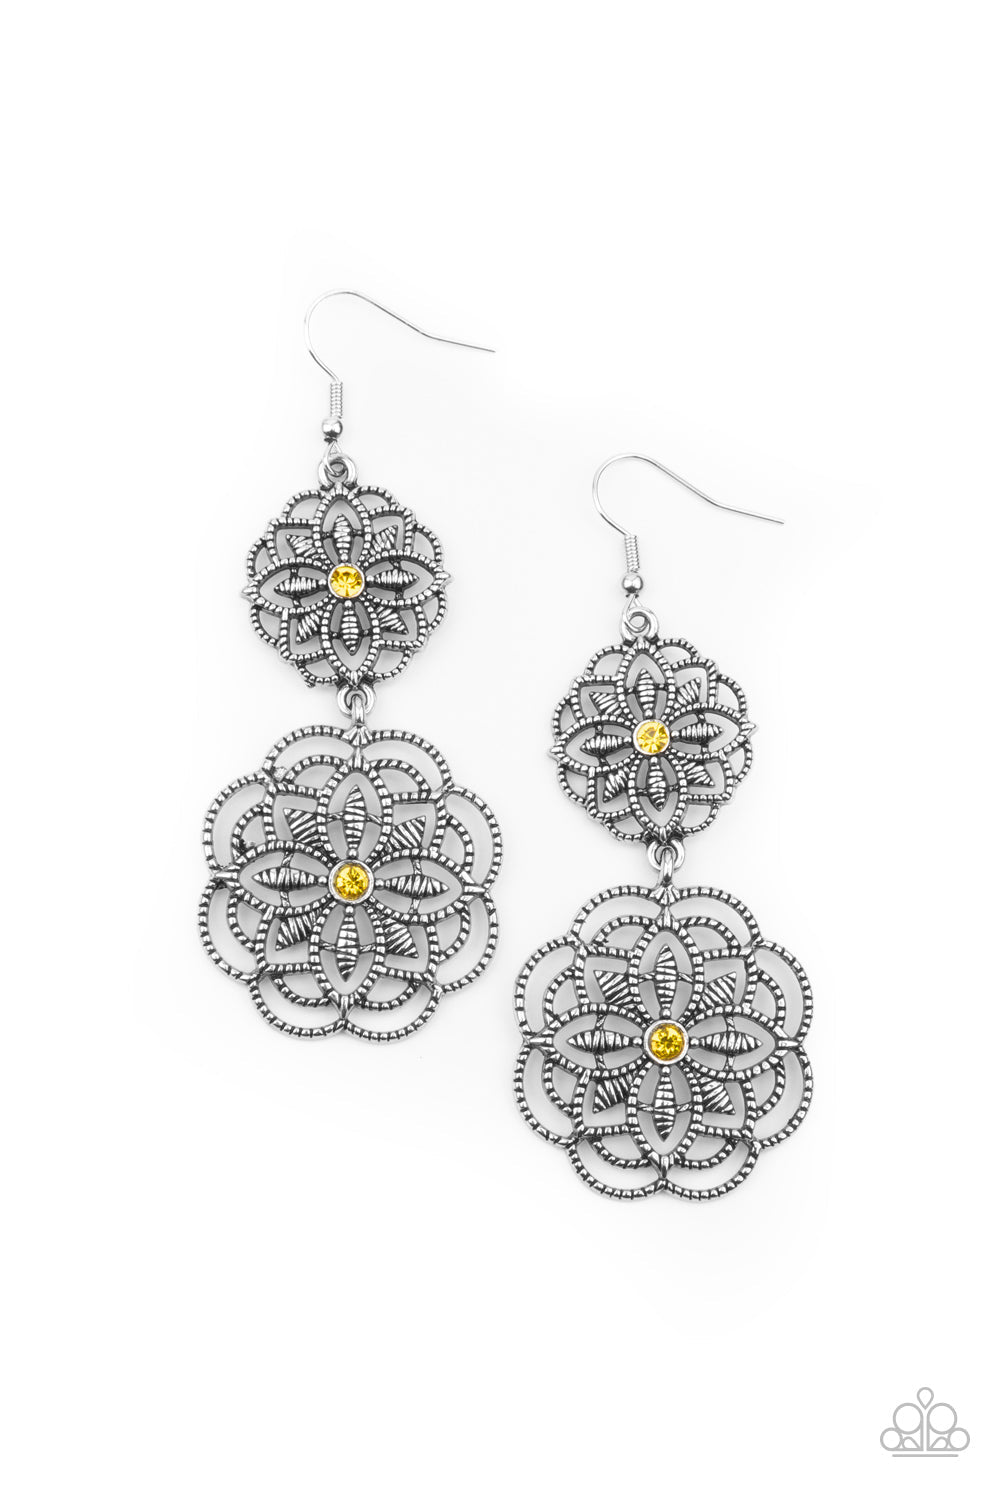 Mandala Mecca - Yellow and Silver Earrings - Paparazzi Accessories - Dotted with dainty yellow rhinestone centers, studded mandala-like silver frames connect into a whimsical floral lure. Earring attaches to a standard fishhook fitting. Sold as one pair of earrings.